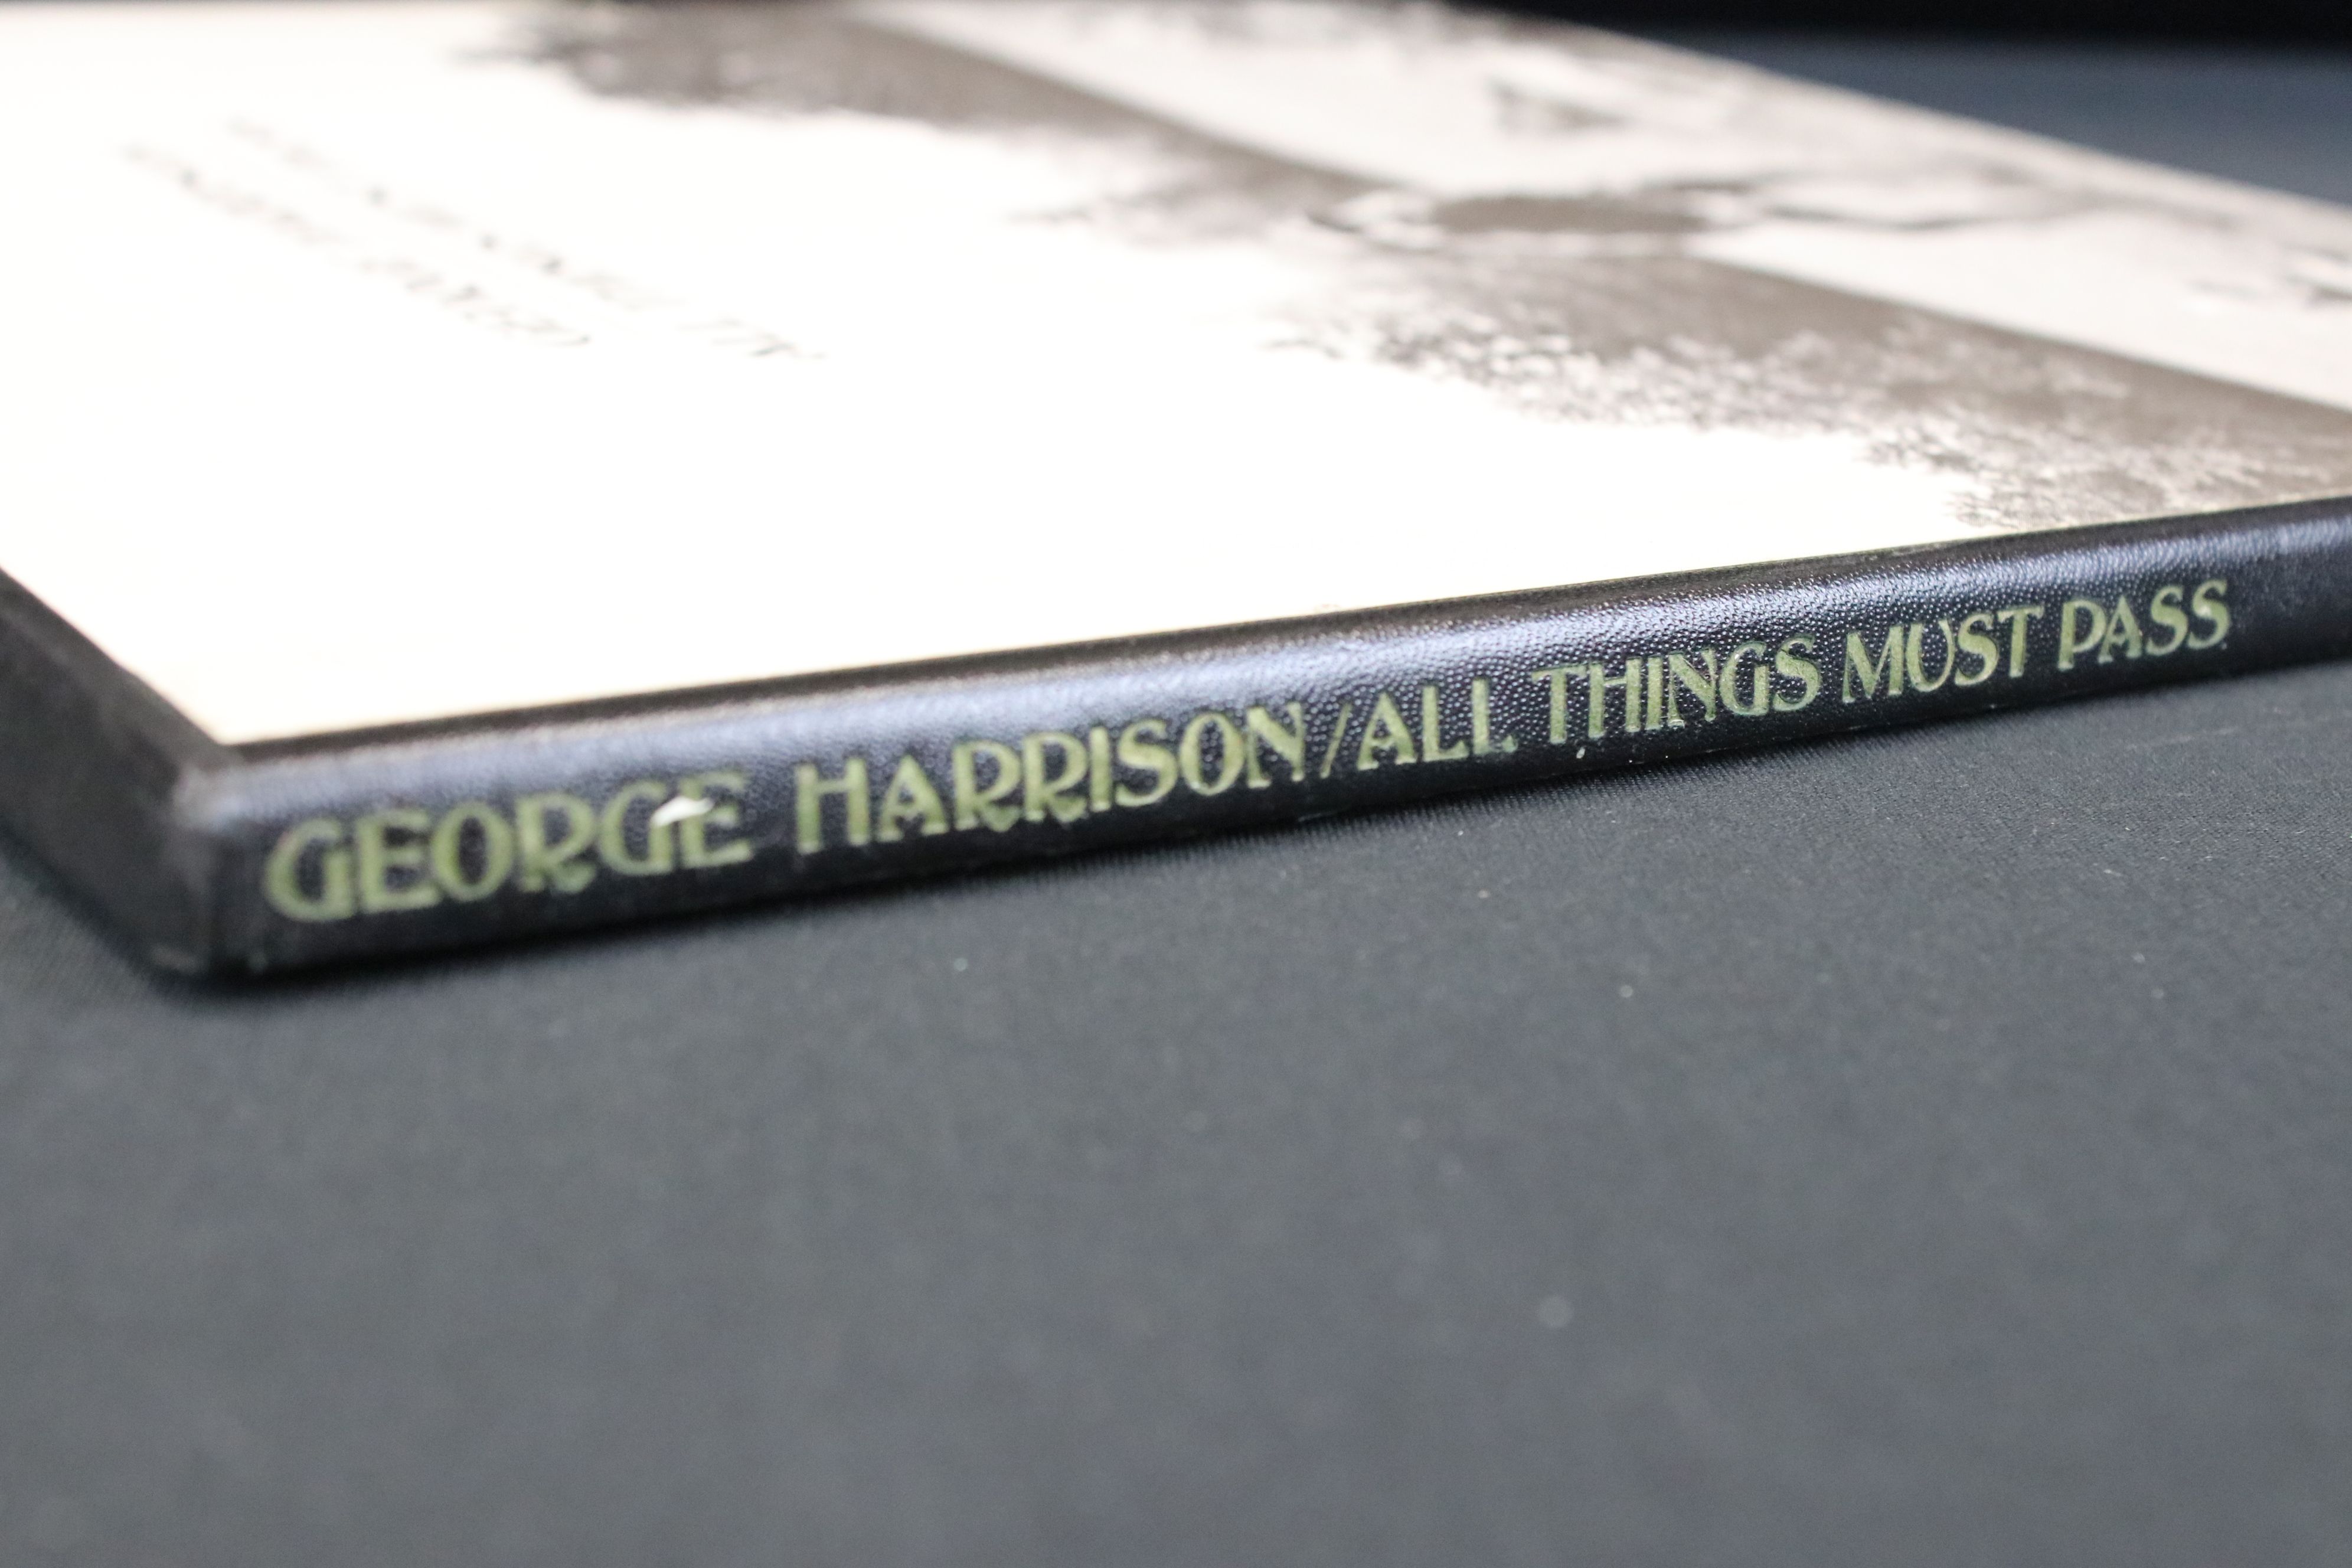 Vinyl - George Harrison All Things Must Pass LP on Apple STCH 639, Eric Clatpon credit to box, - Image 5 of 5